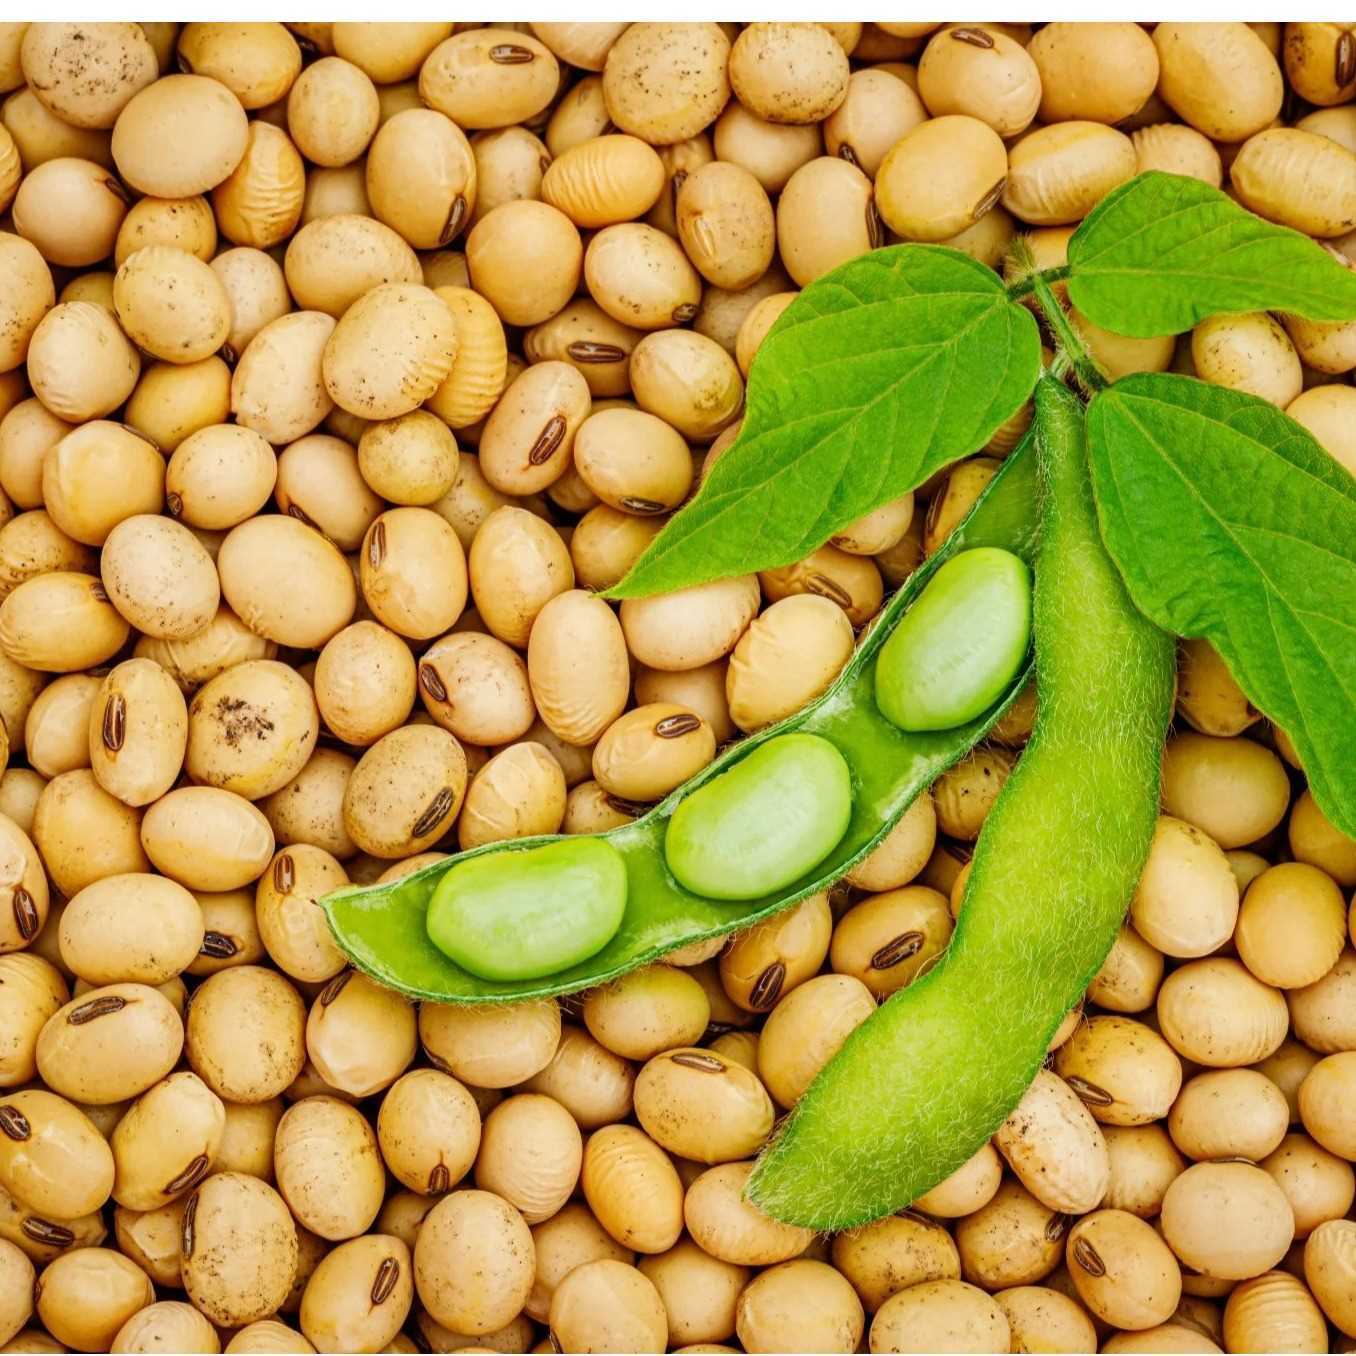 I am looking for soybeans suppliers 